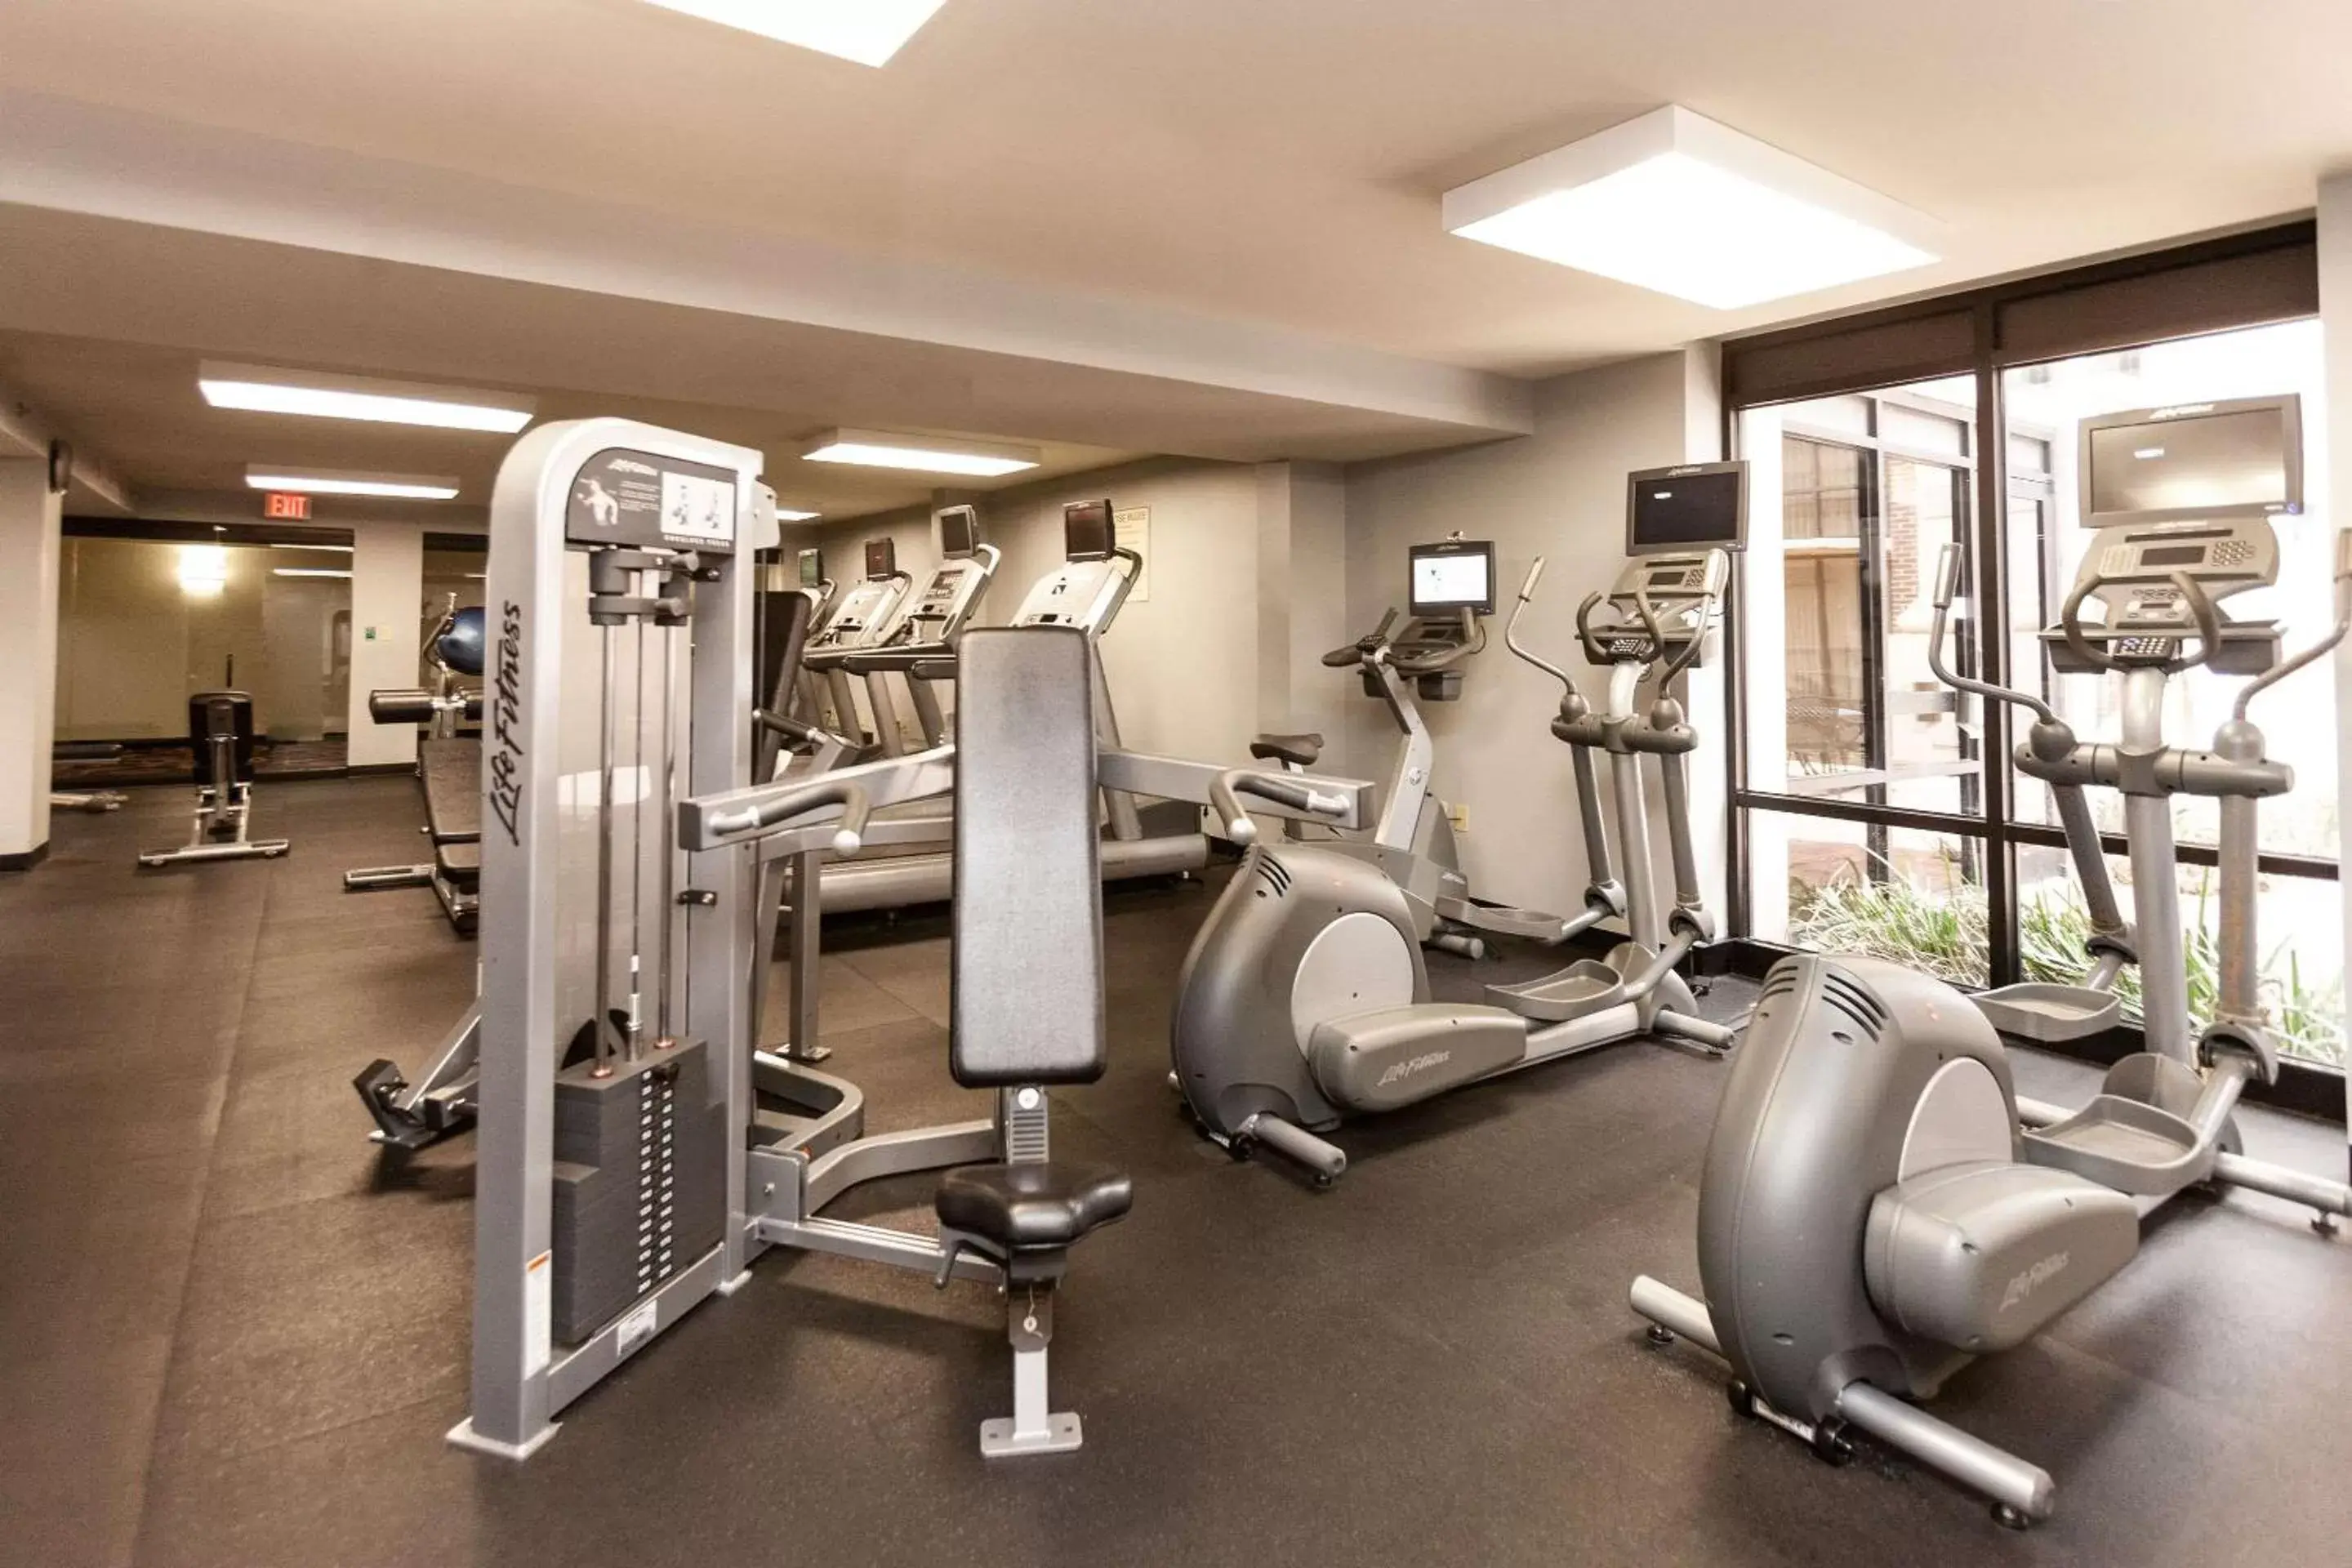 Fitness centre/facilities, Fitness Center/Facilities in Clarion Hotel New Orleans - Airport & Conference Center